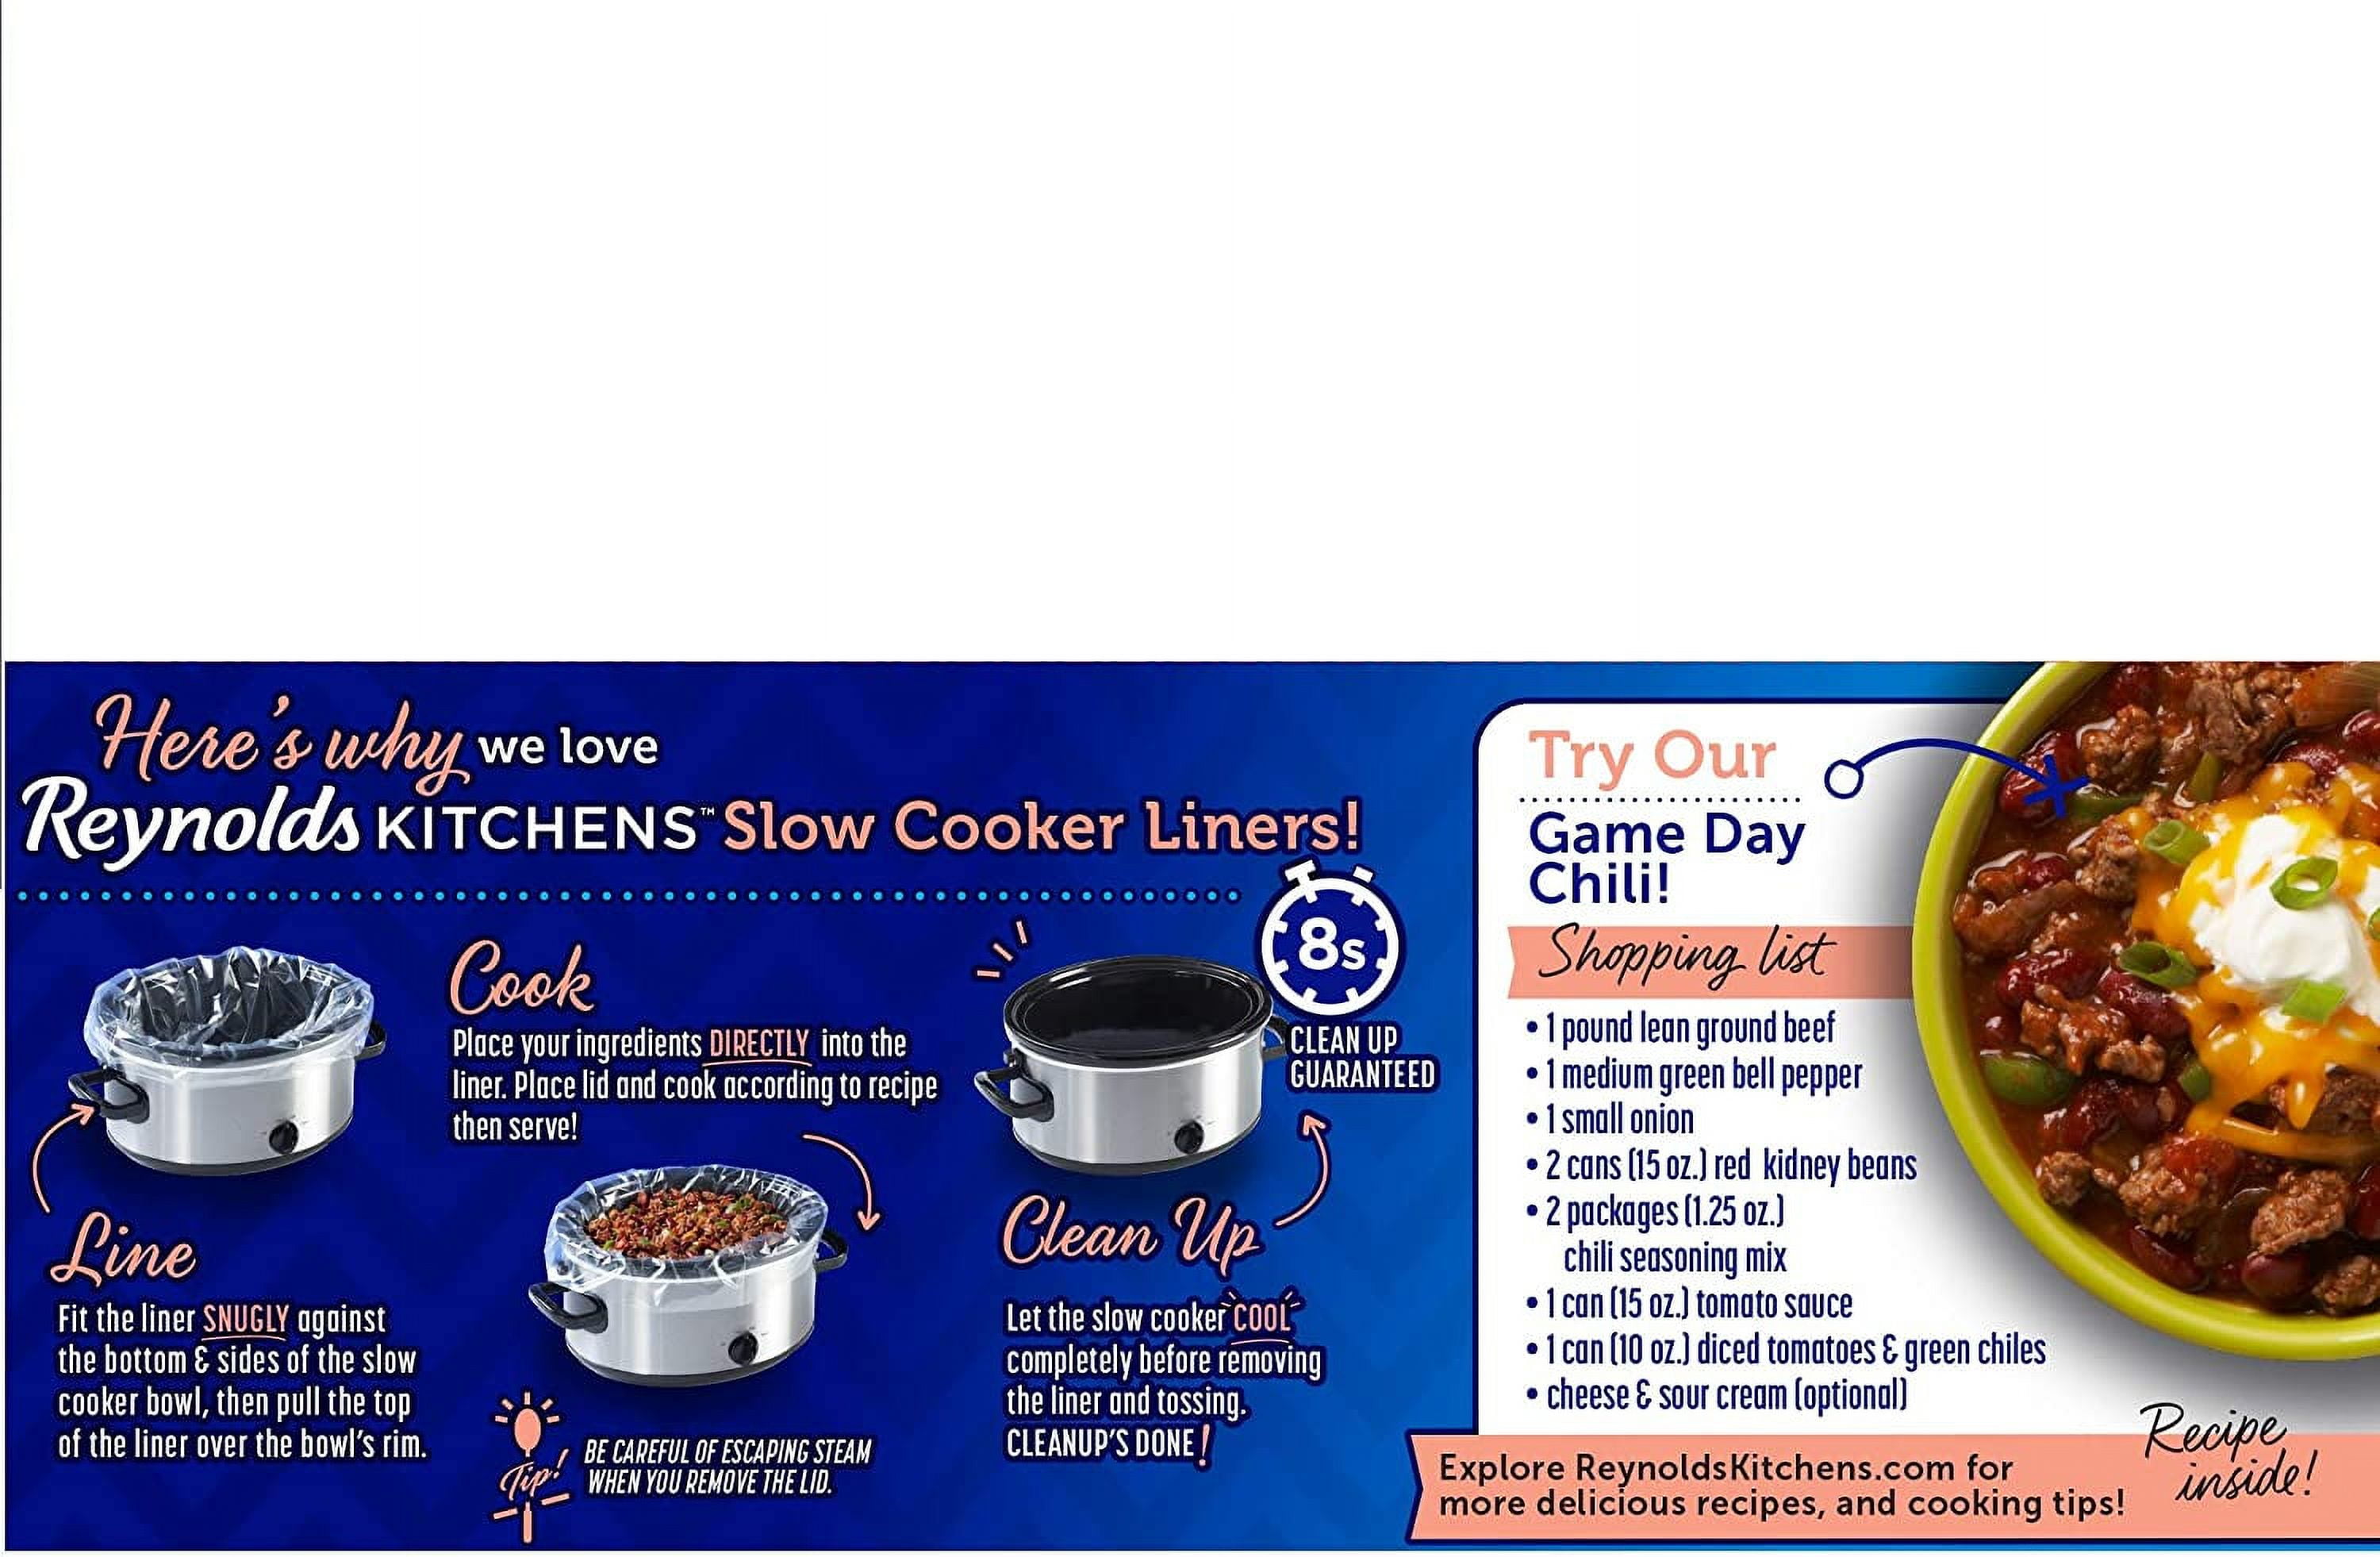  Reynolds Bundle  Reynolds Kitchens Slow Cooker Liners,  Regular, 6 Count (Pack of 1) and Reynolds Kitchens Pop-Up Parchment Paper  Sheets, 10.7x13.6 Inch, 30 Count : Home & Kitchen